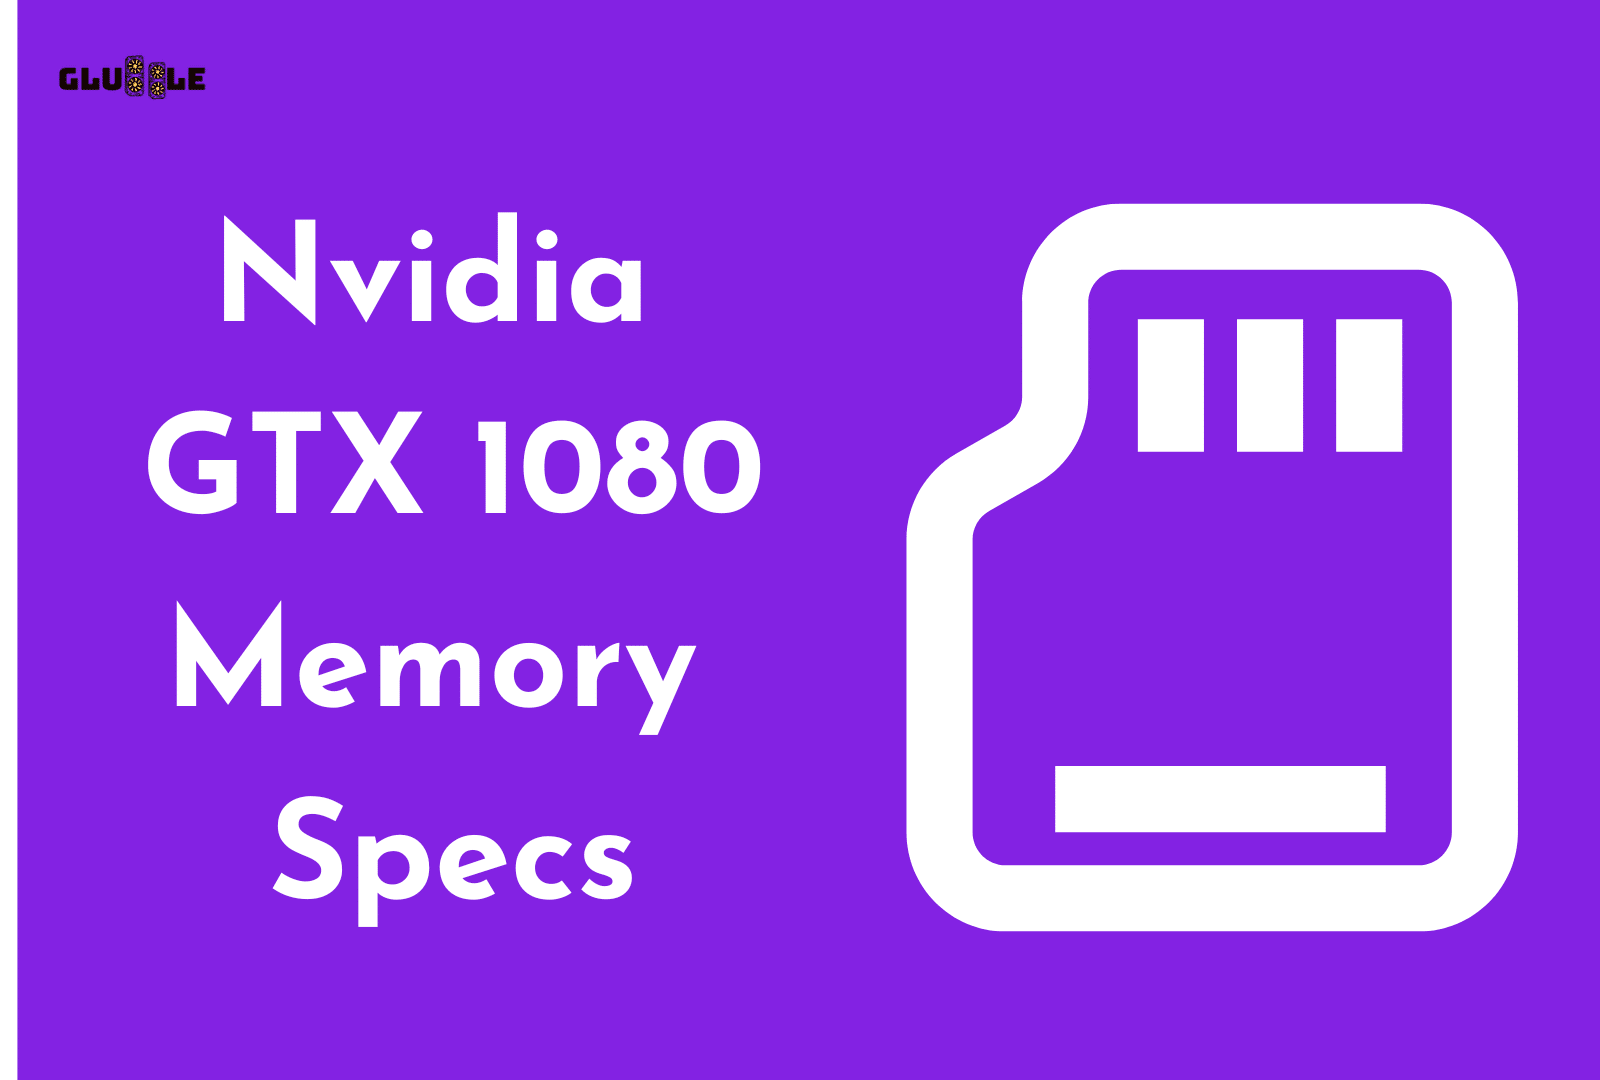 C:\Users\Mohsin\Downloads\Nvidia GTX 1080 Memory Specs.png